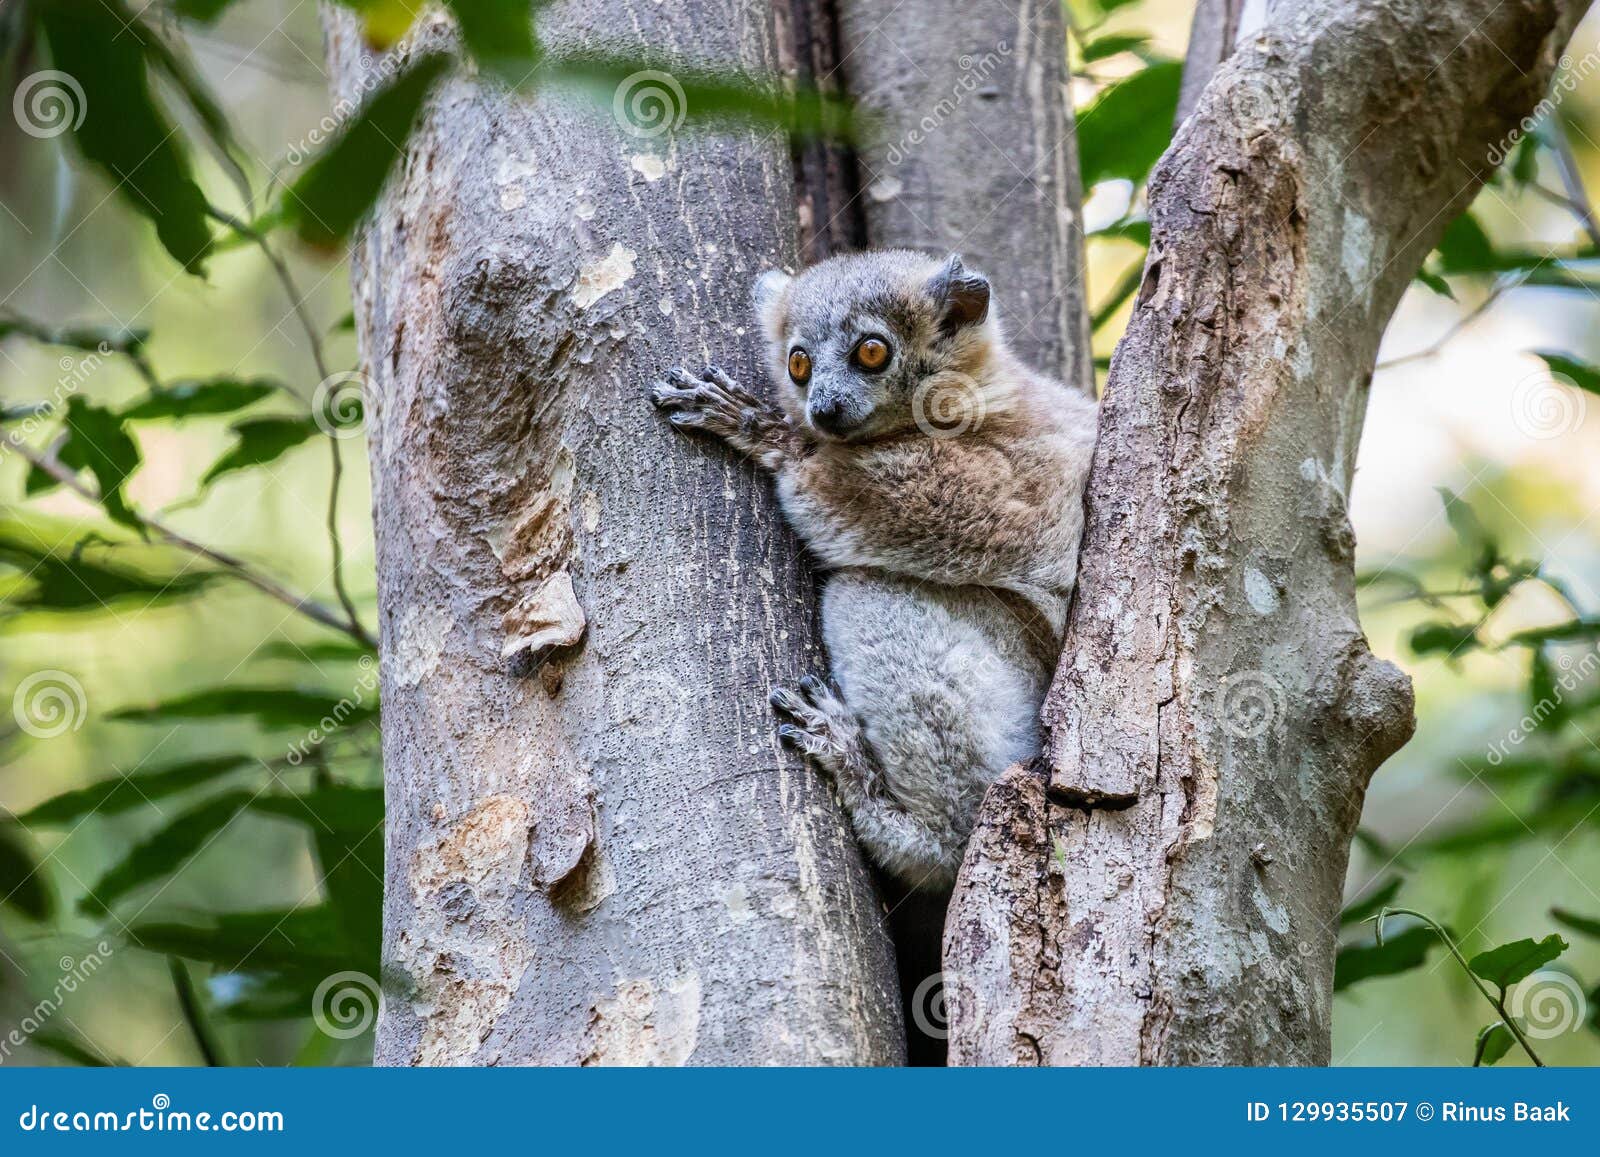 white-footed sportive lemur